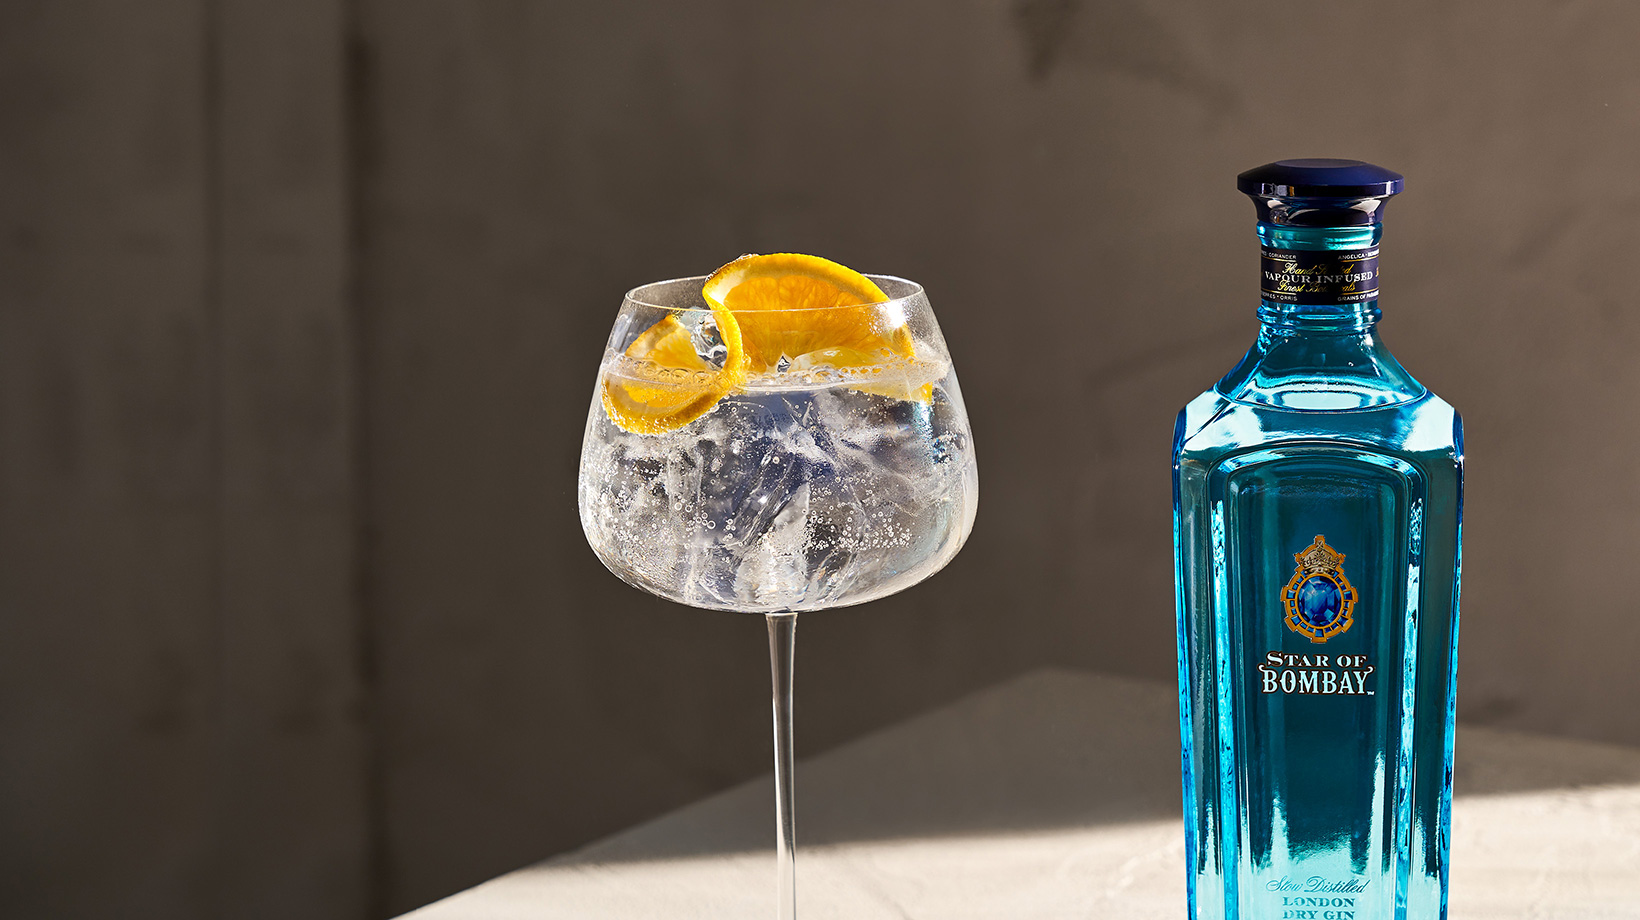 Star & Tonic Cocktail | How To Make A Star & Tonic | Bombay Sapphire